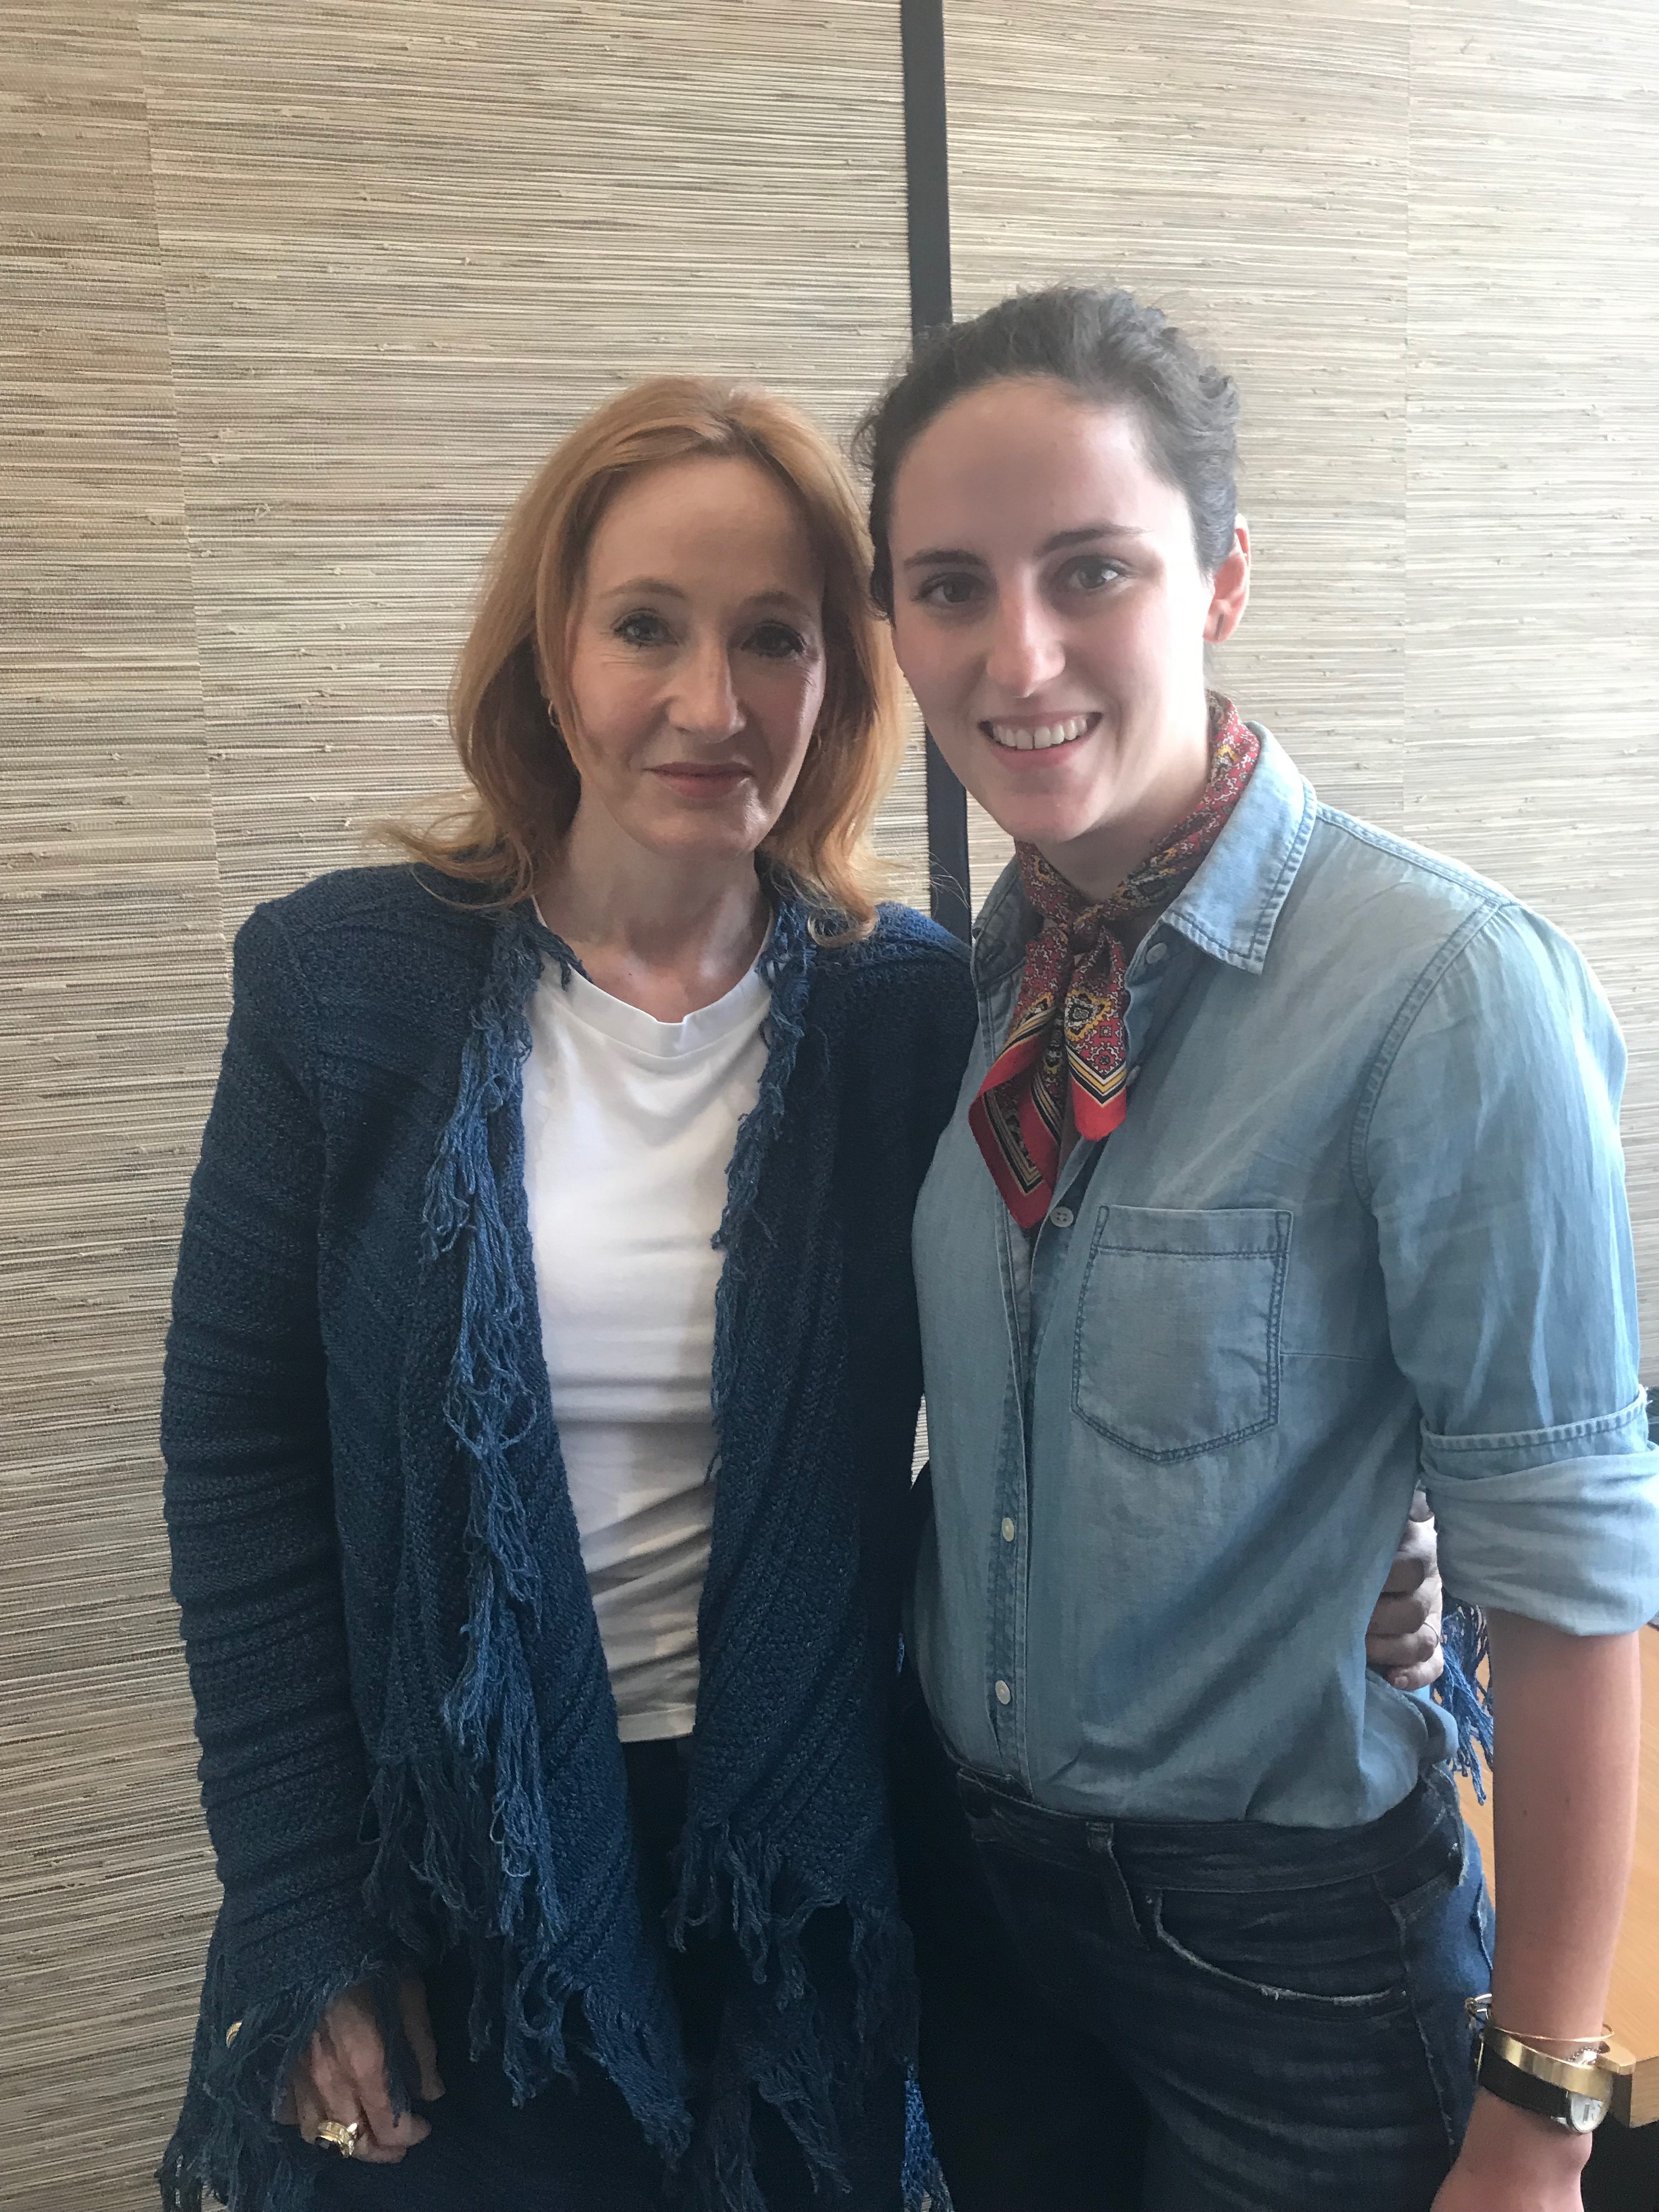 Photo of the author standing next to J.K. Rowling.